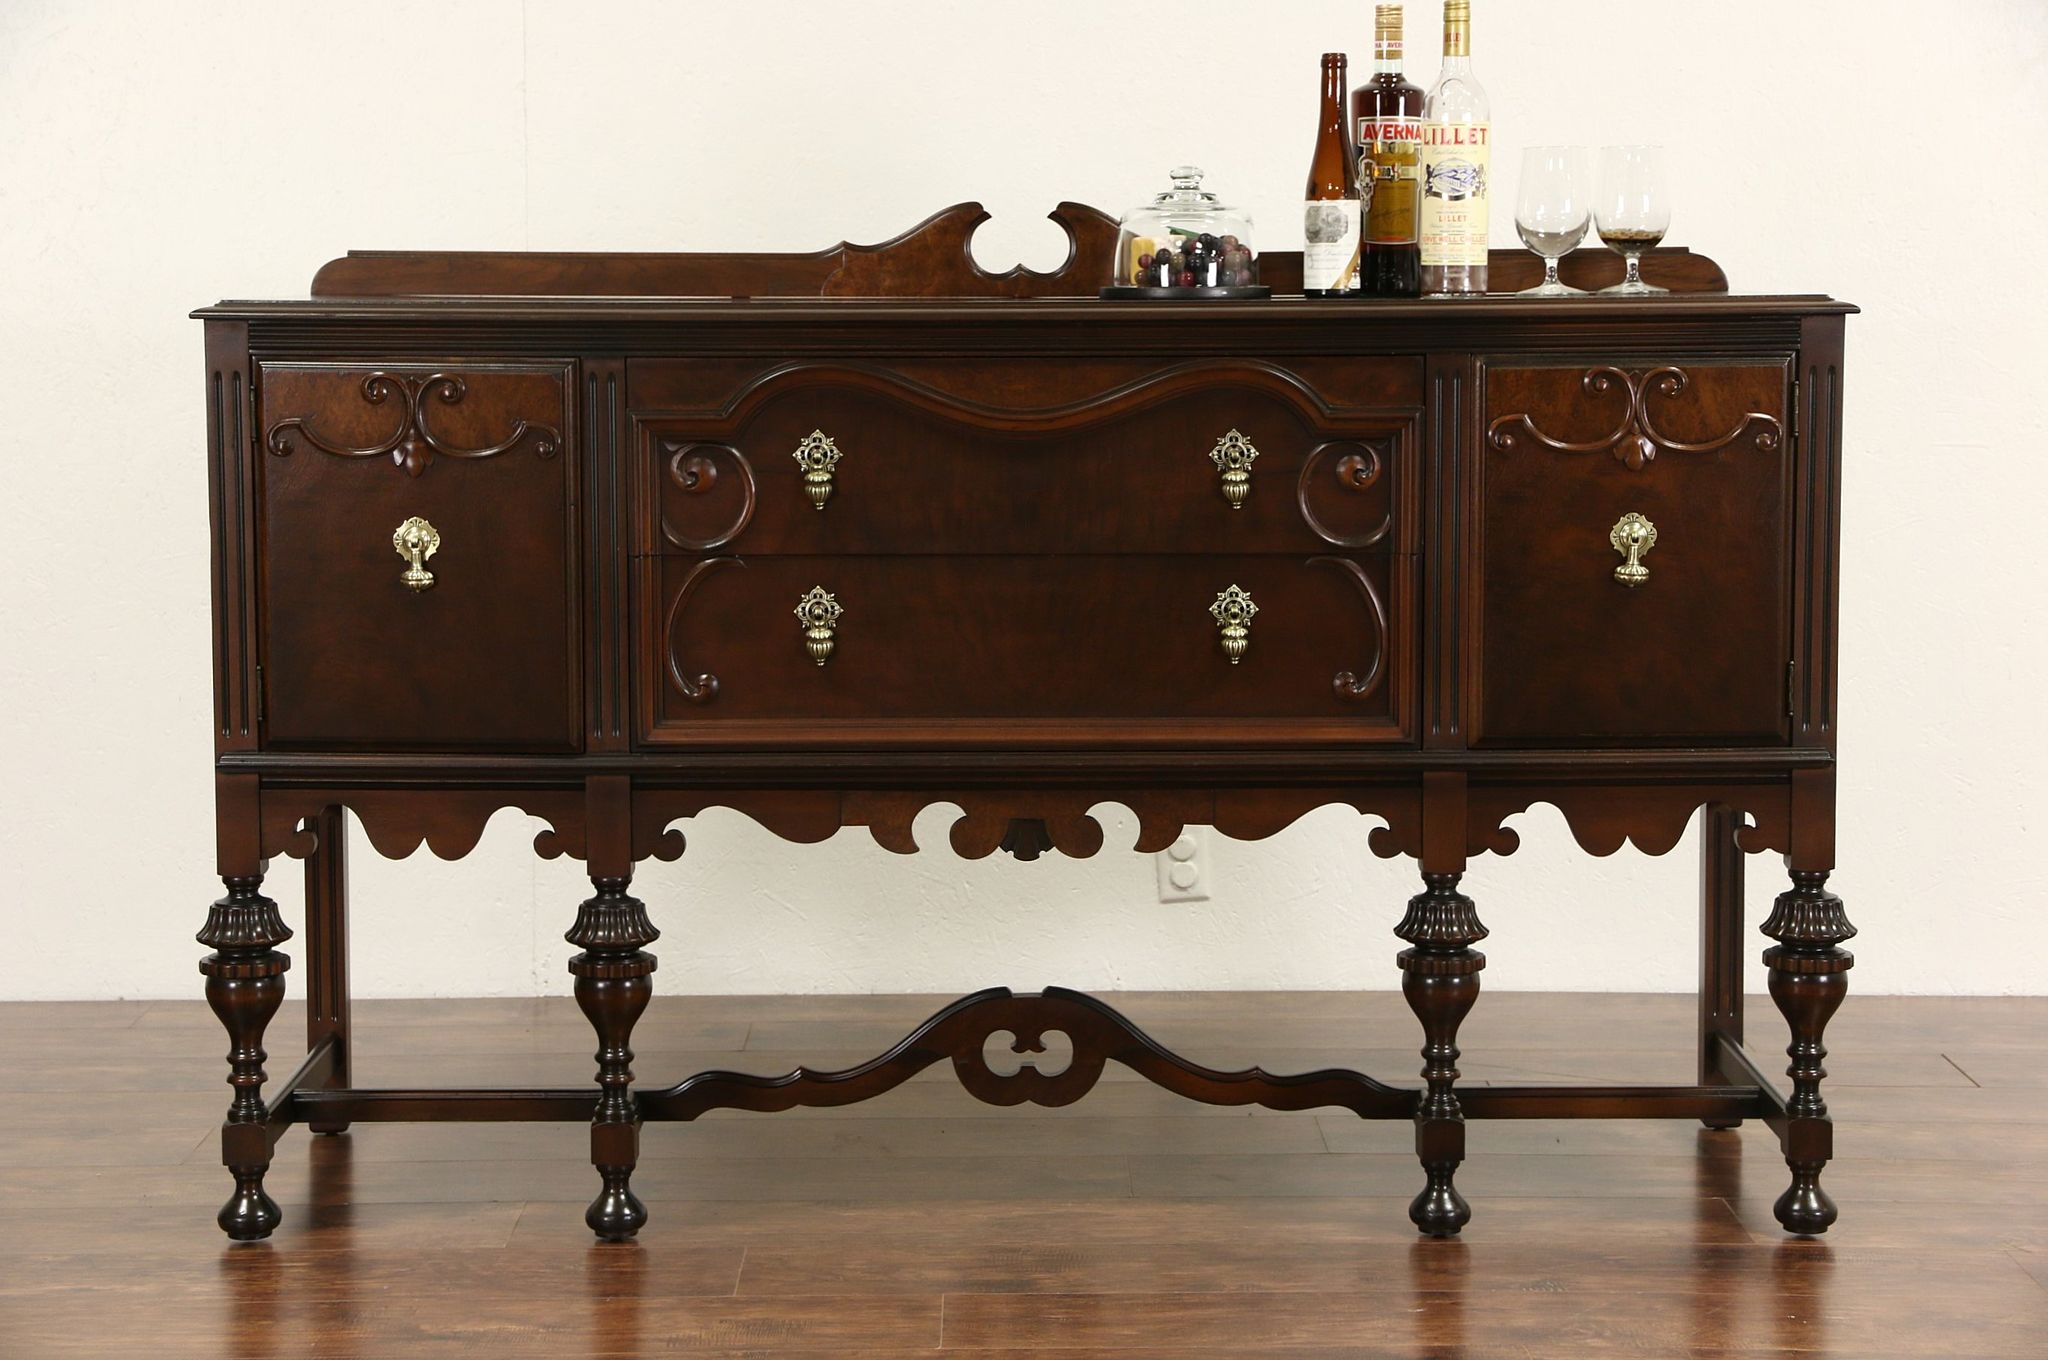 What is a antique buffet?